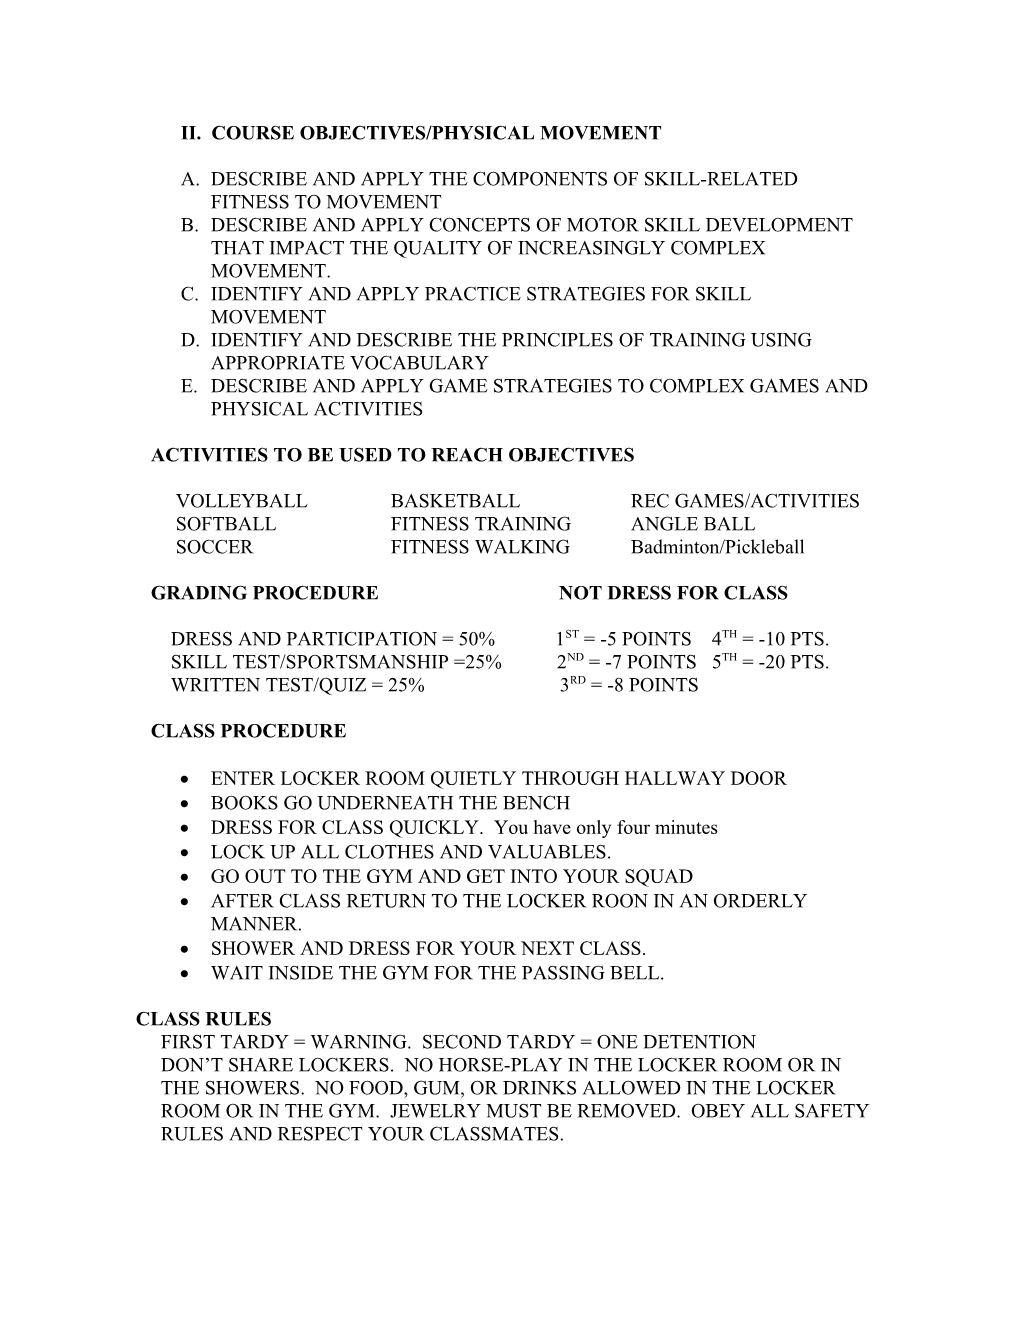 Physical Education Syllabus 9 Mr. Cook